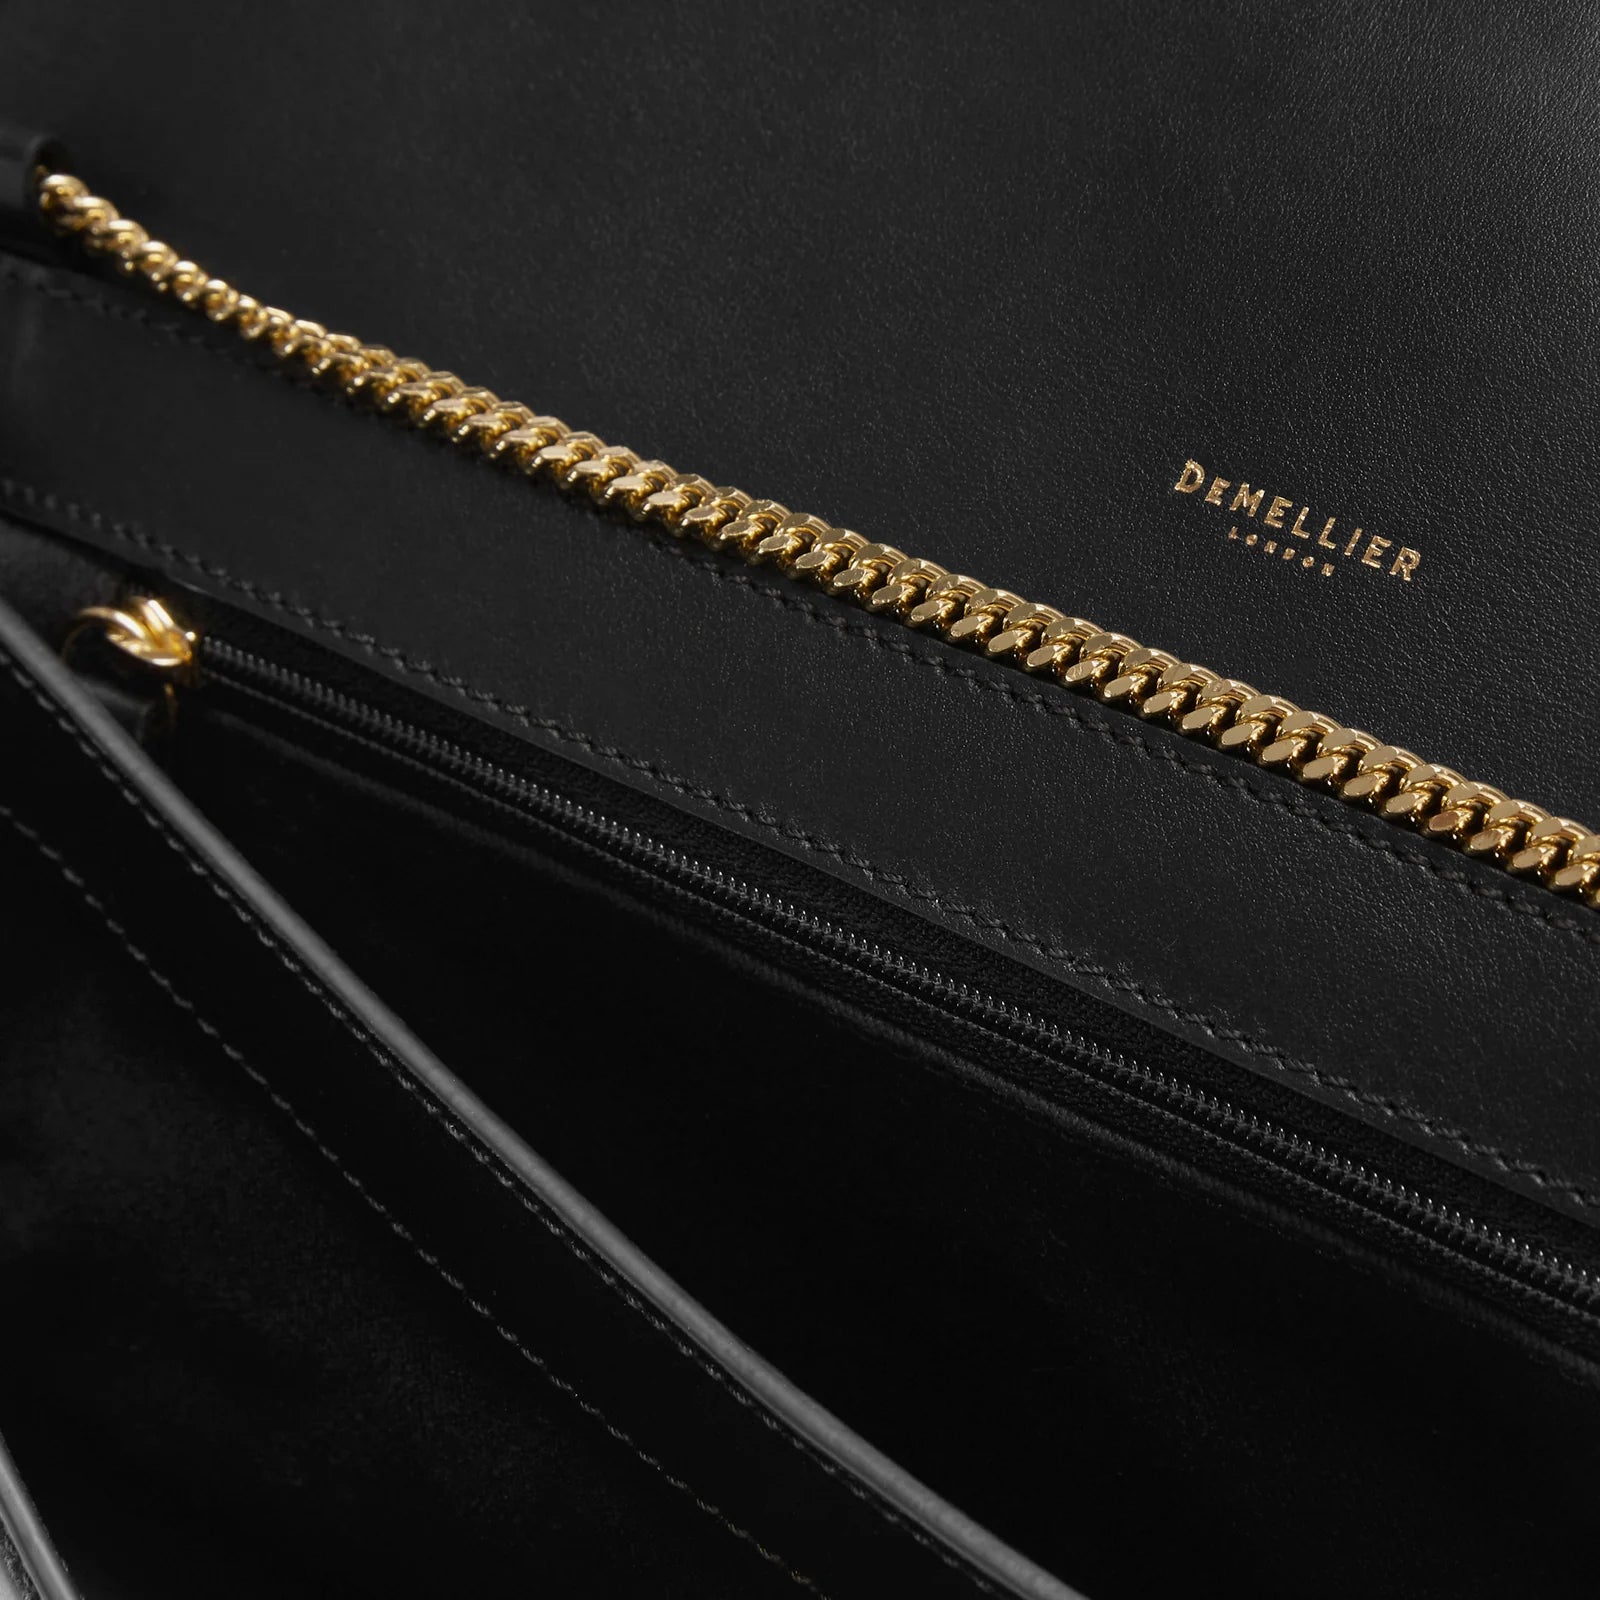 The Paris Clutch in Black Smooth Leather